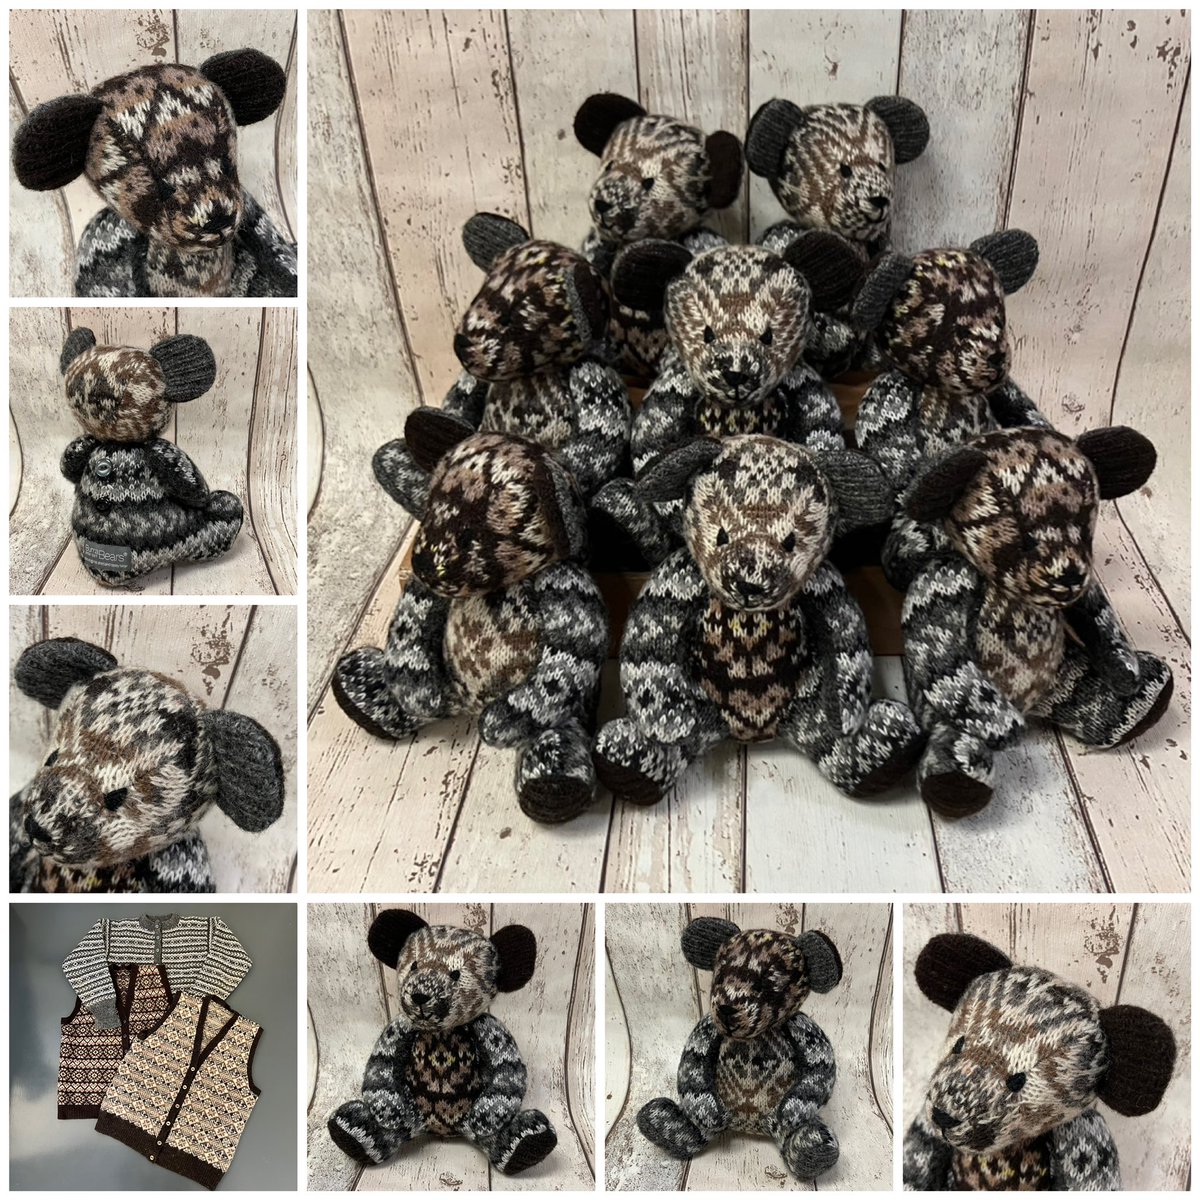 Burra Bear commissions: a family of 8 peerie Burra Bears made from a combination of three beautiful hand knitted Fair Isle garments in memory of a dear Mam and Granny, much loved and very sadly missed #burrabears #Shetland